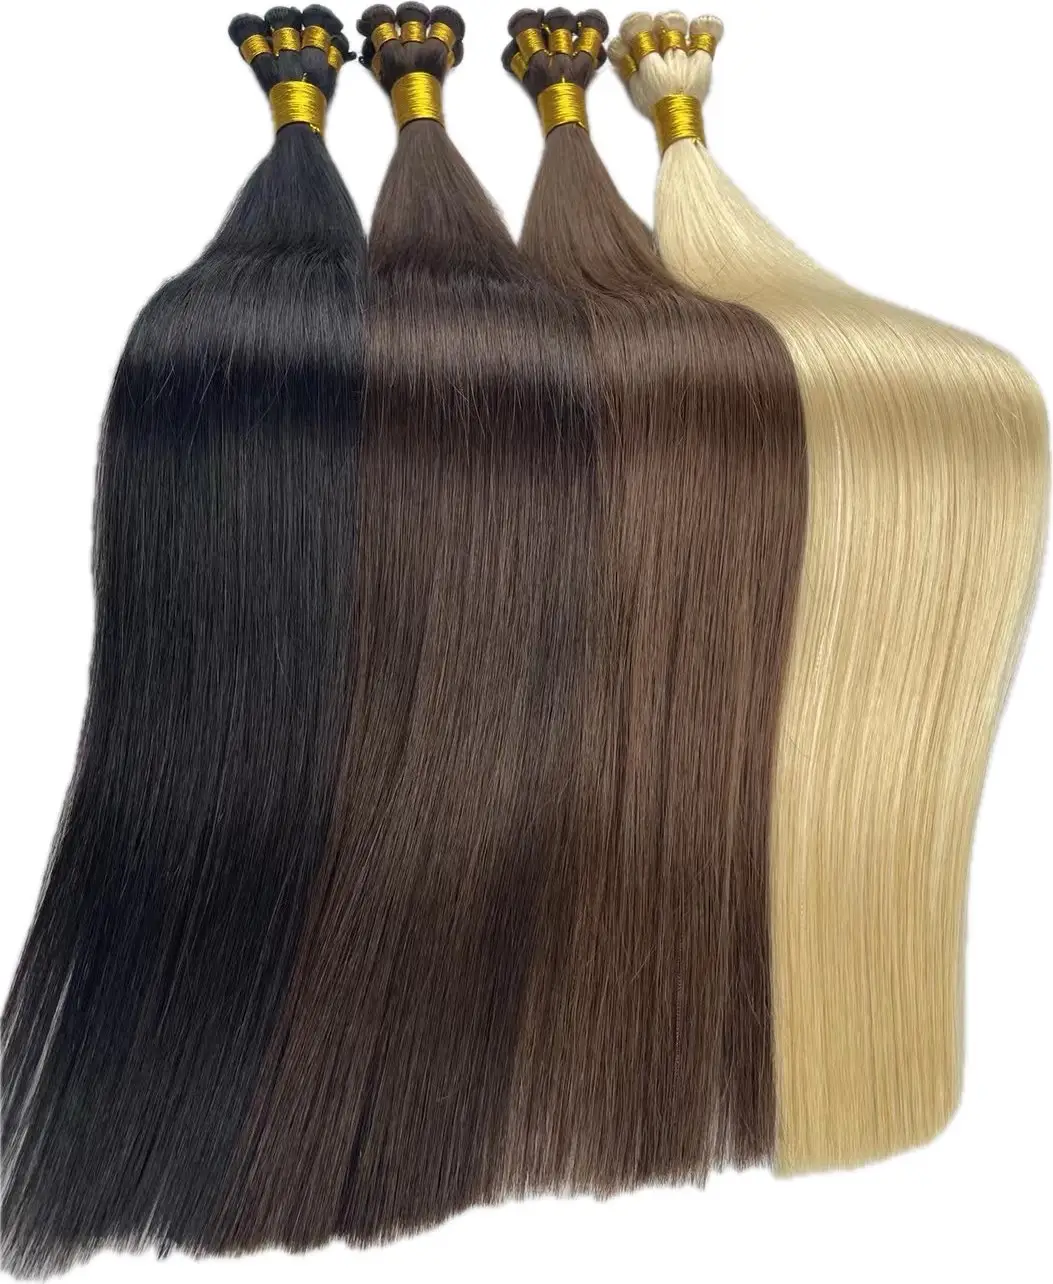 Wholesale Genius Weft Hair Extensions Virgin Remy Russian Hair Double Drawn Skin Thin Handtied Weft Hair